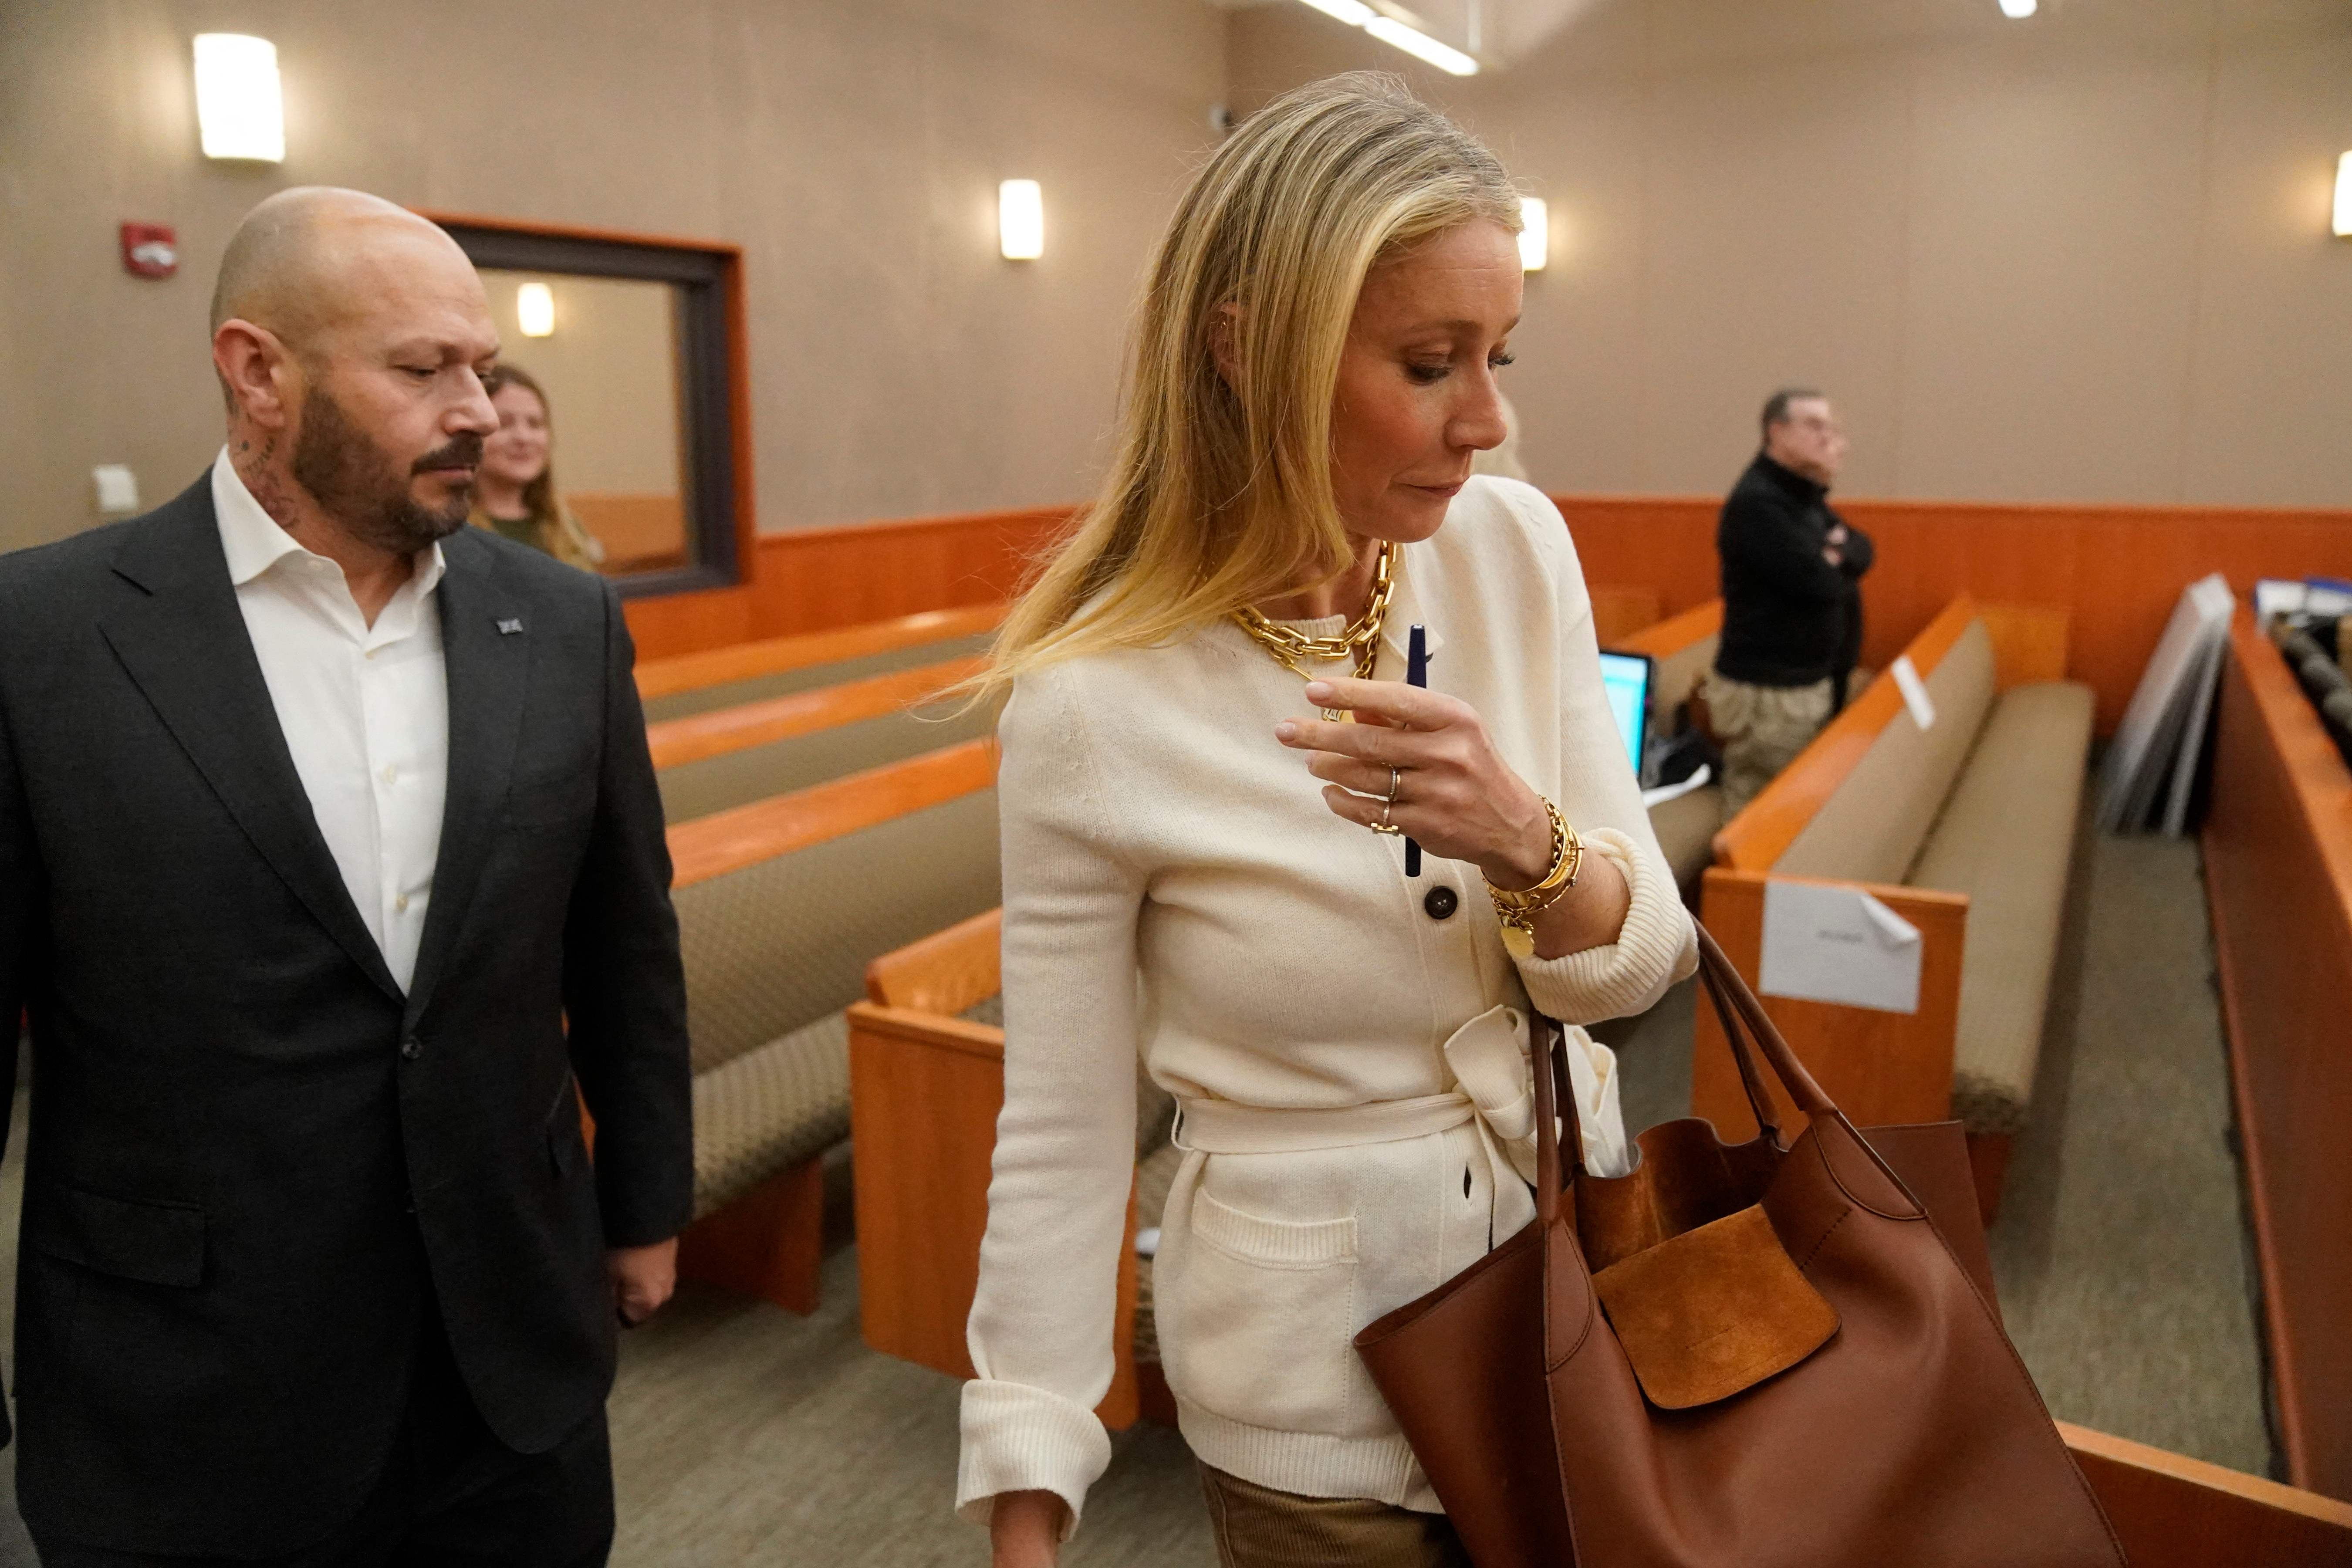 Gwyneth Paltrow enters the courtroom